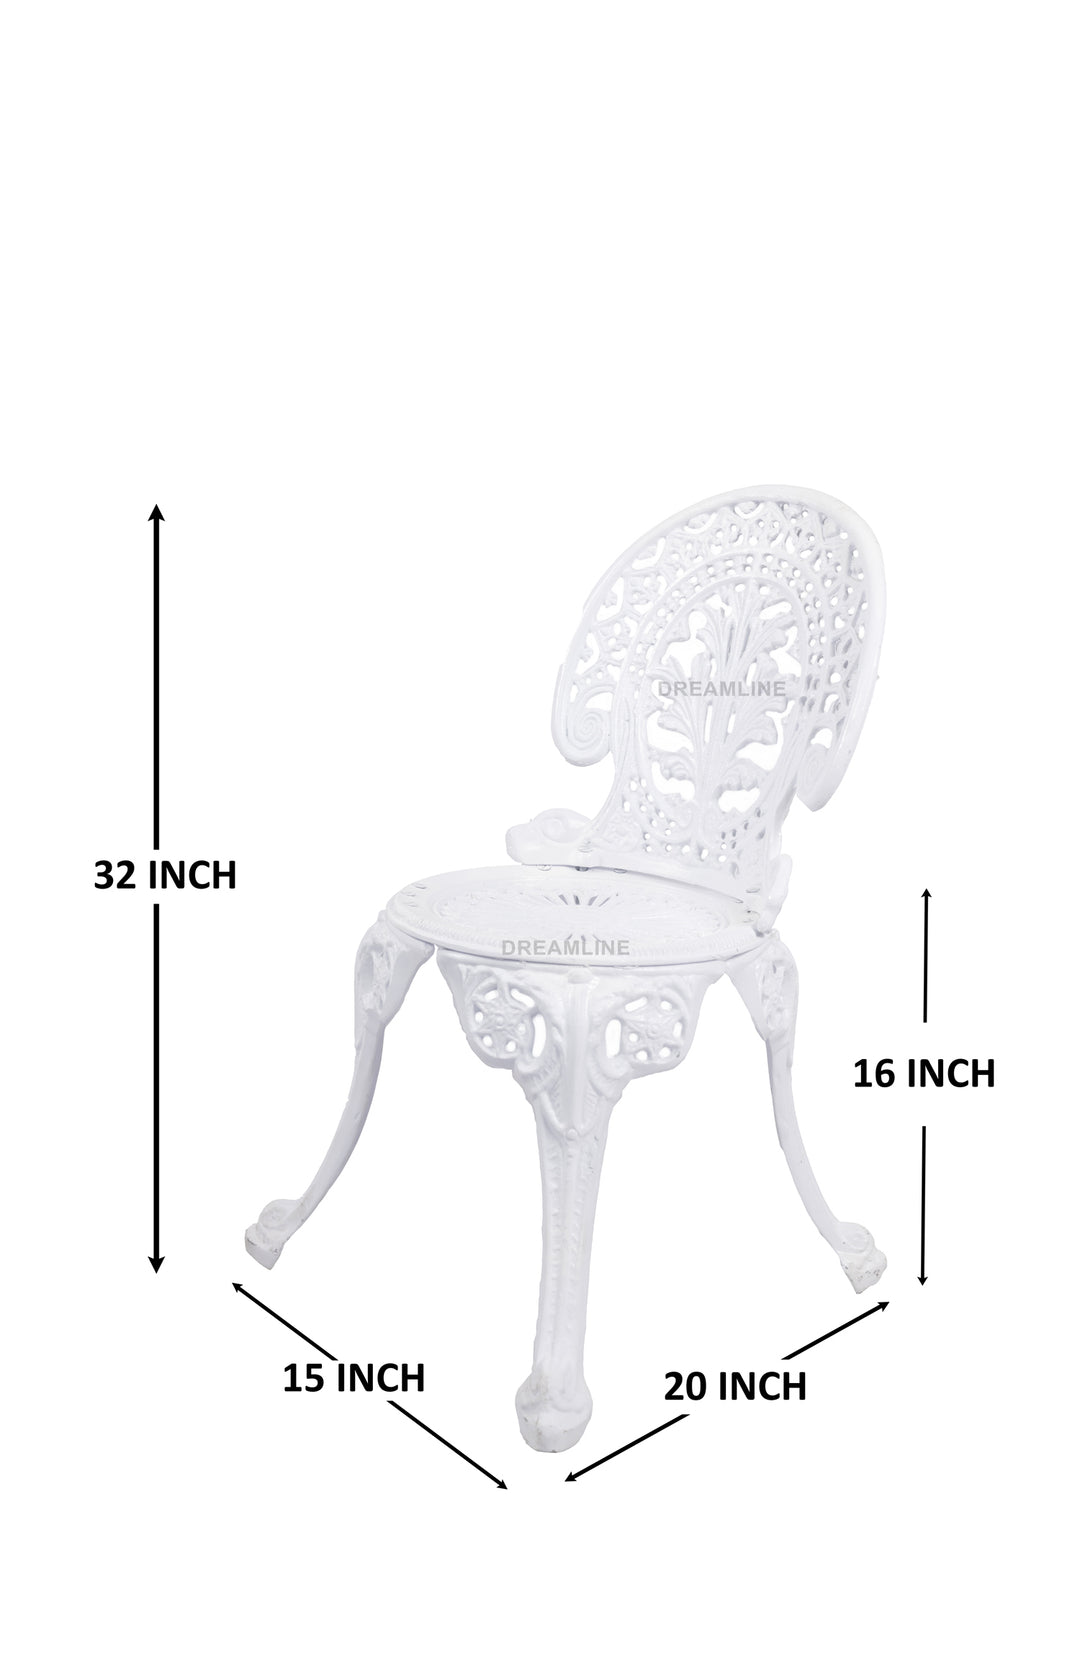 Clux Cast Aluminium Garden Patio Seating 3 Chair and 1 Table Set (White)